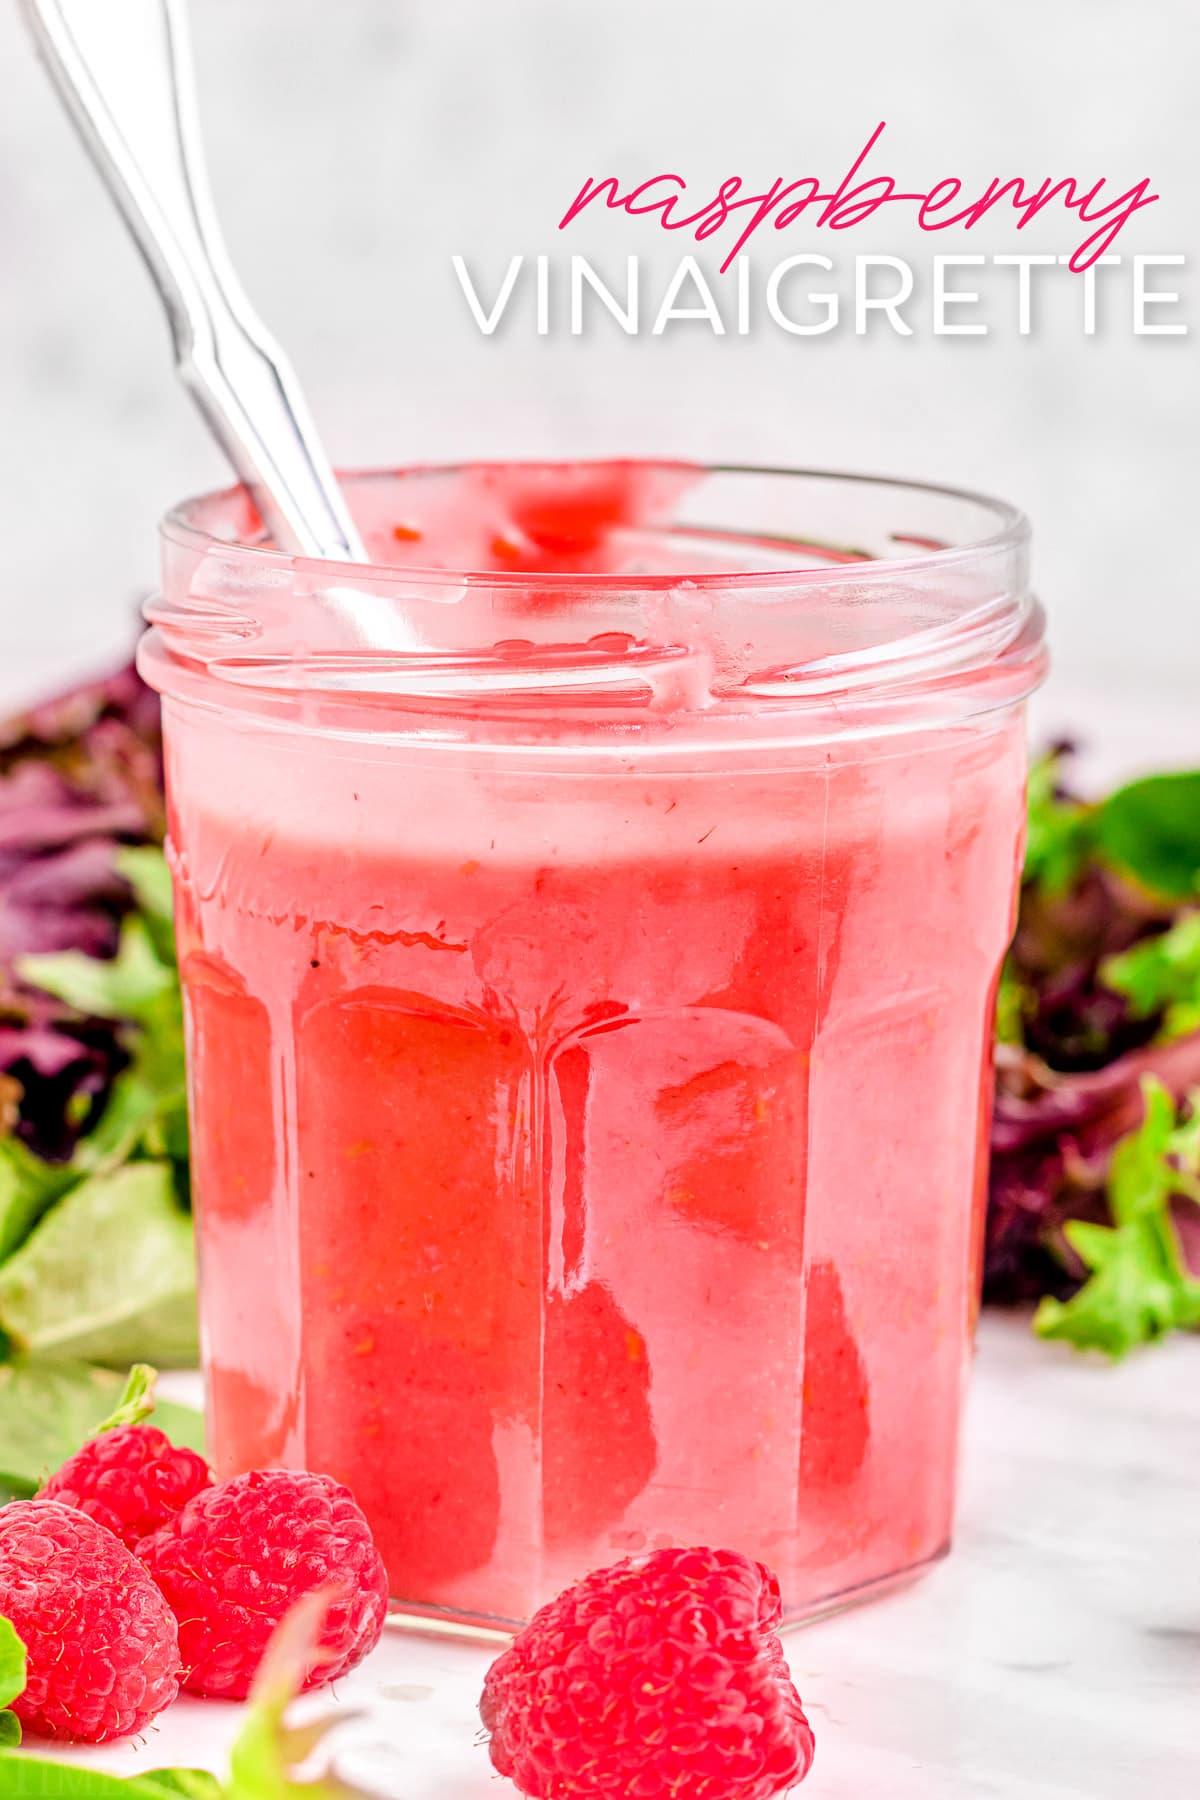 raspberry vinaigrette in glass jar with small spoon in jar. title overlay at top of image.